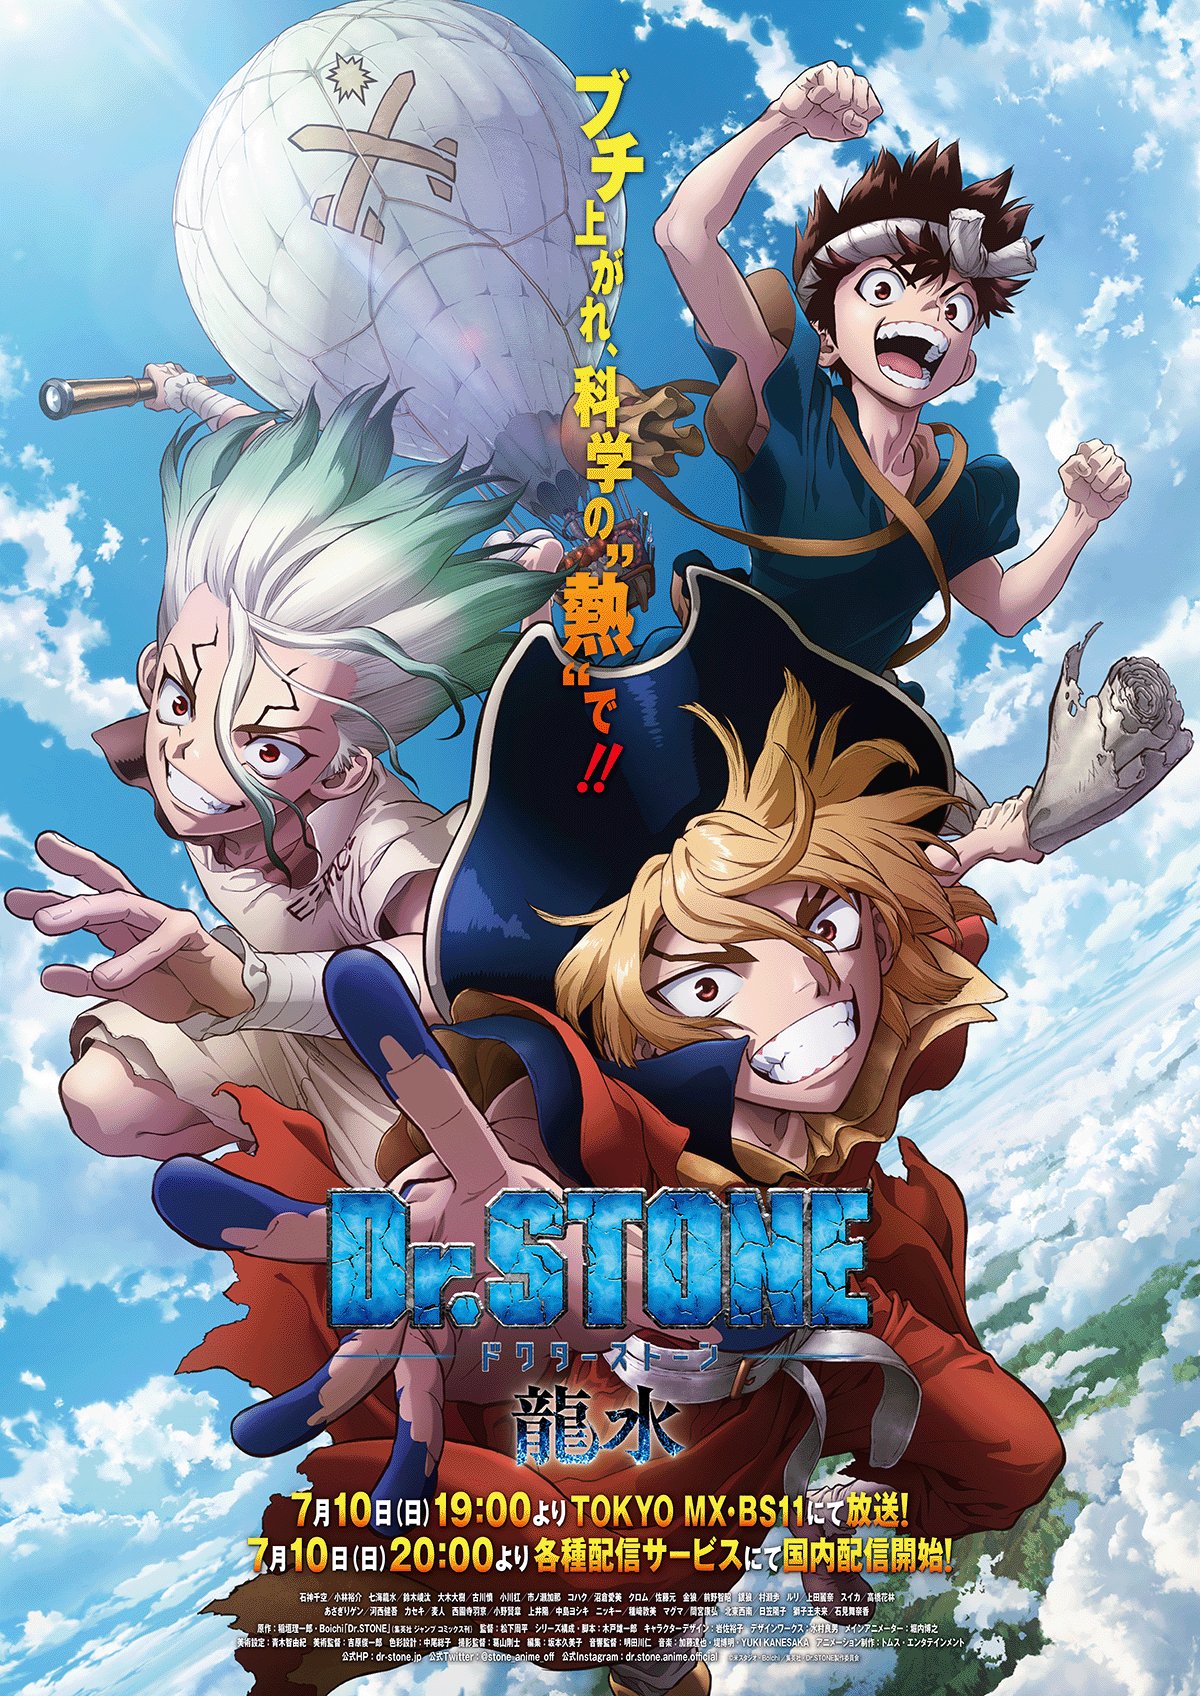 "Dr. Stone Ryusui" Makes A Flashy Debut With New Trailer And Key Art